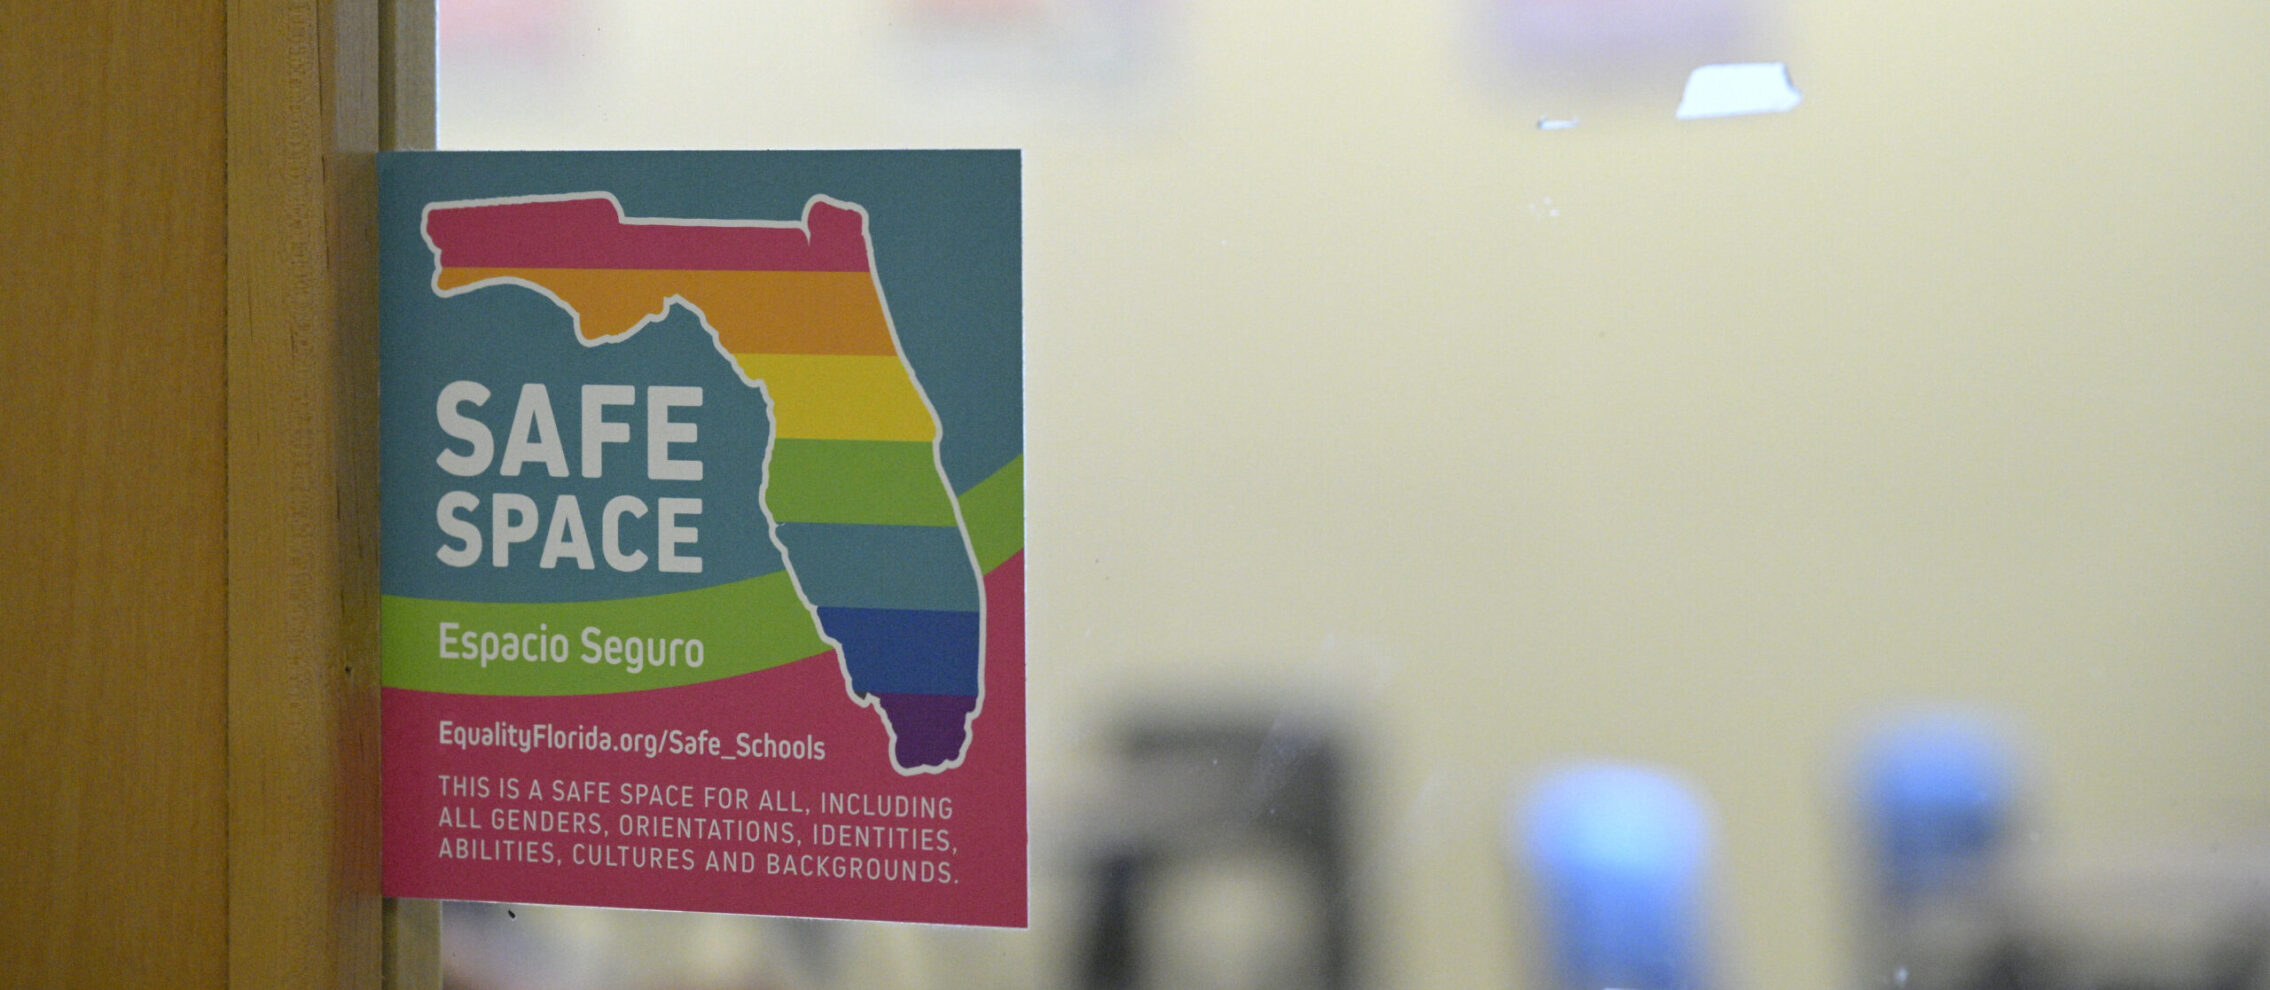 A rainbow, Florida-shaped Safe Space sticker designating a supportive place for LGBTQ+ people is viewed outside of a classroom door at a high school, Tuesday, Aug. 8, 2023, in Orlando, Fla. (Phelan M. Ebenhack via AP)